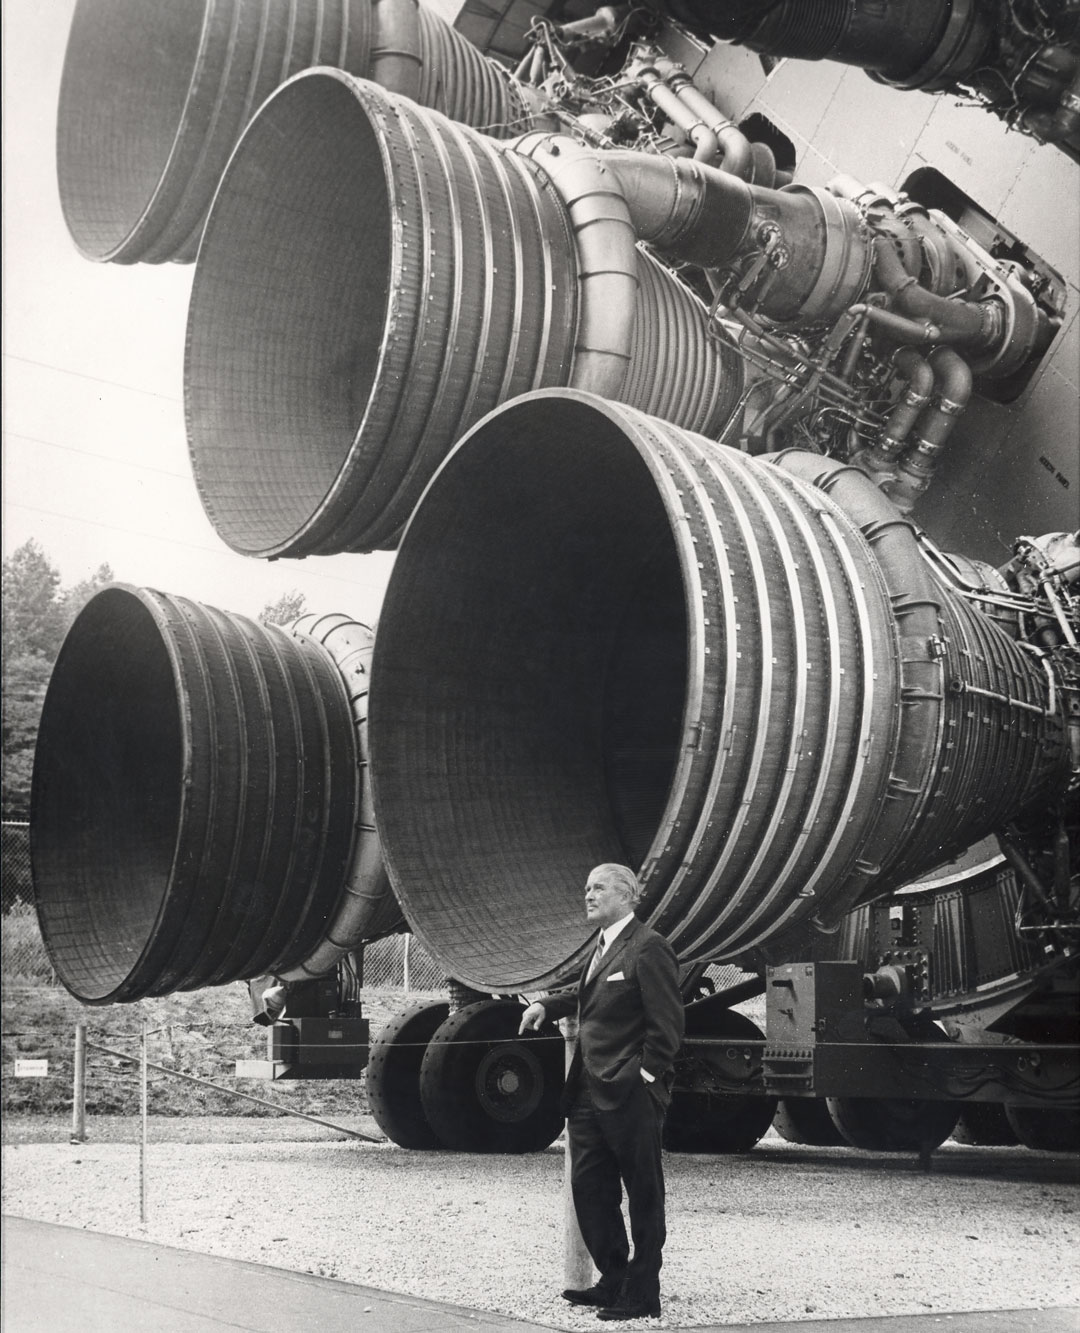 Wernher von Braun in front of F-1 engines for the first stage of a Saturn V rocket, US Space and Rocket Center, Huntsville, Alabama, 1959. As reproduced in Sun and Moon